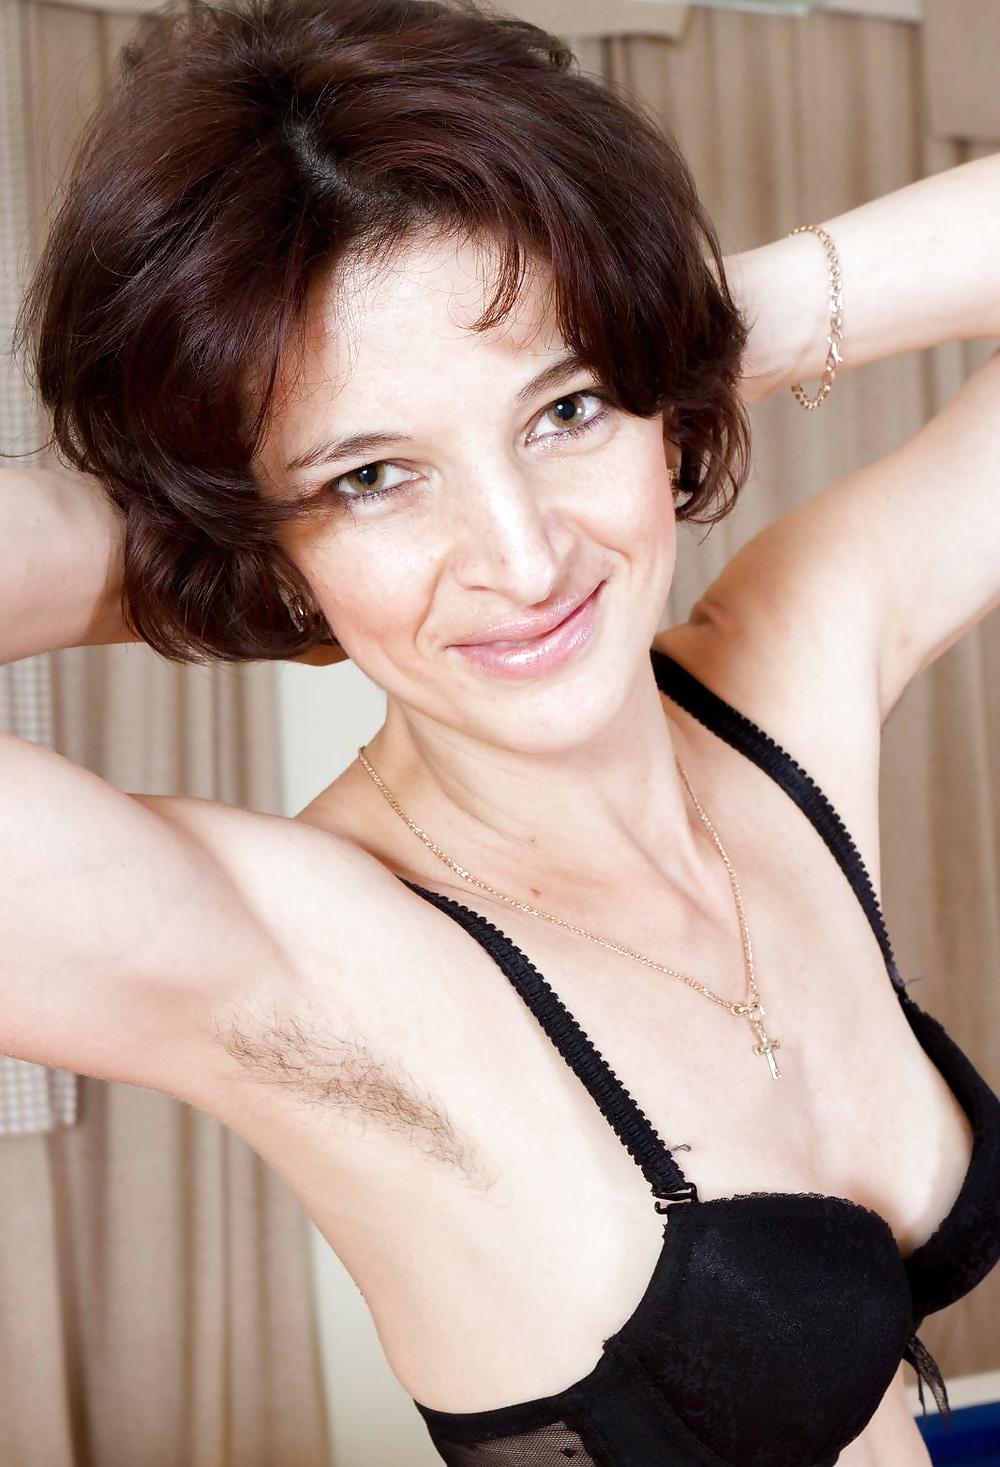 Girls with hairy, unshaven armpits Mb #36621379